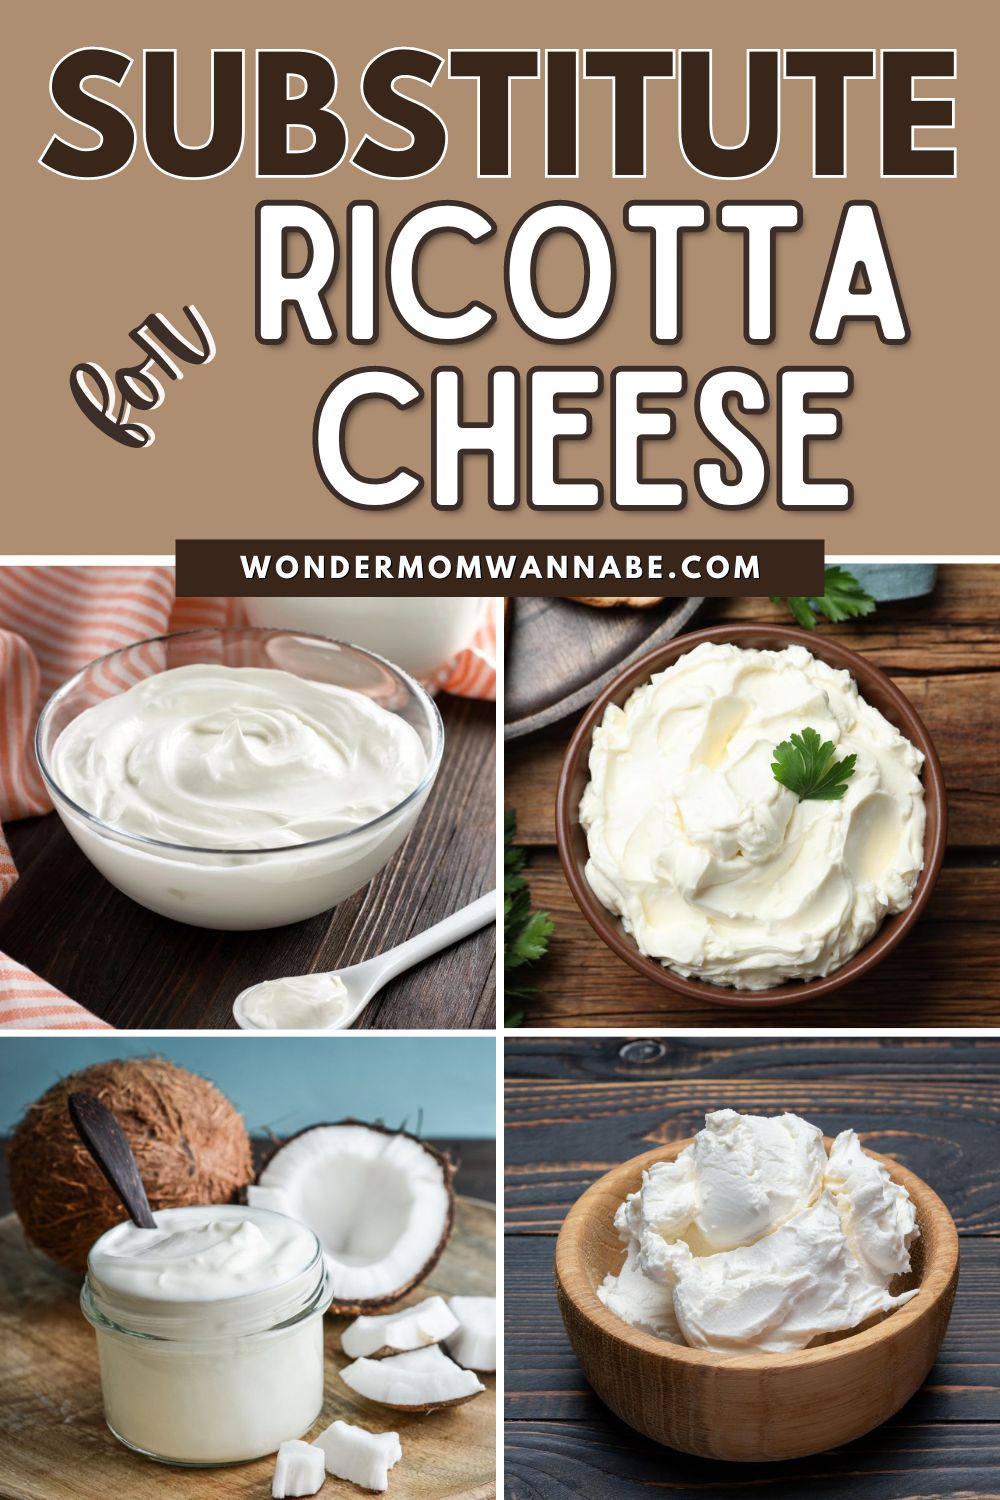 Replacement for ricotta cheese for diverse culinary uses.